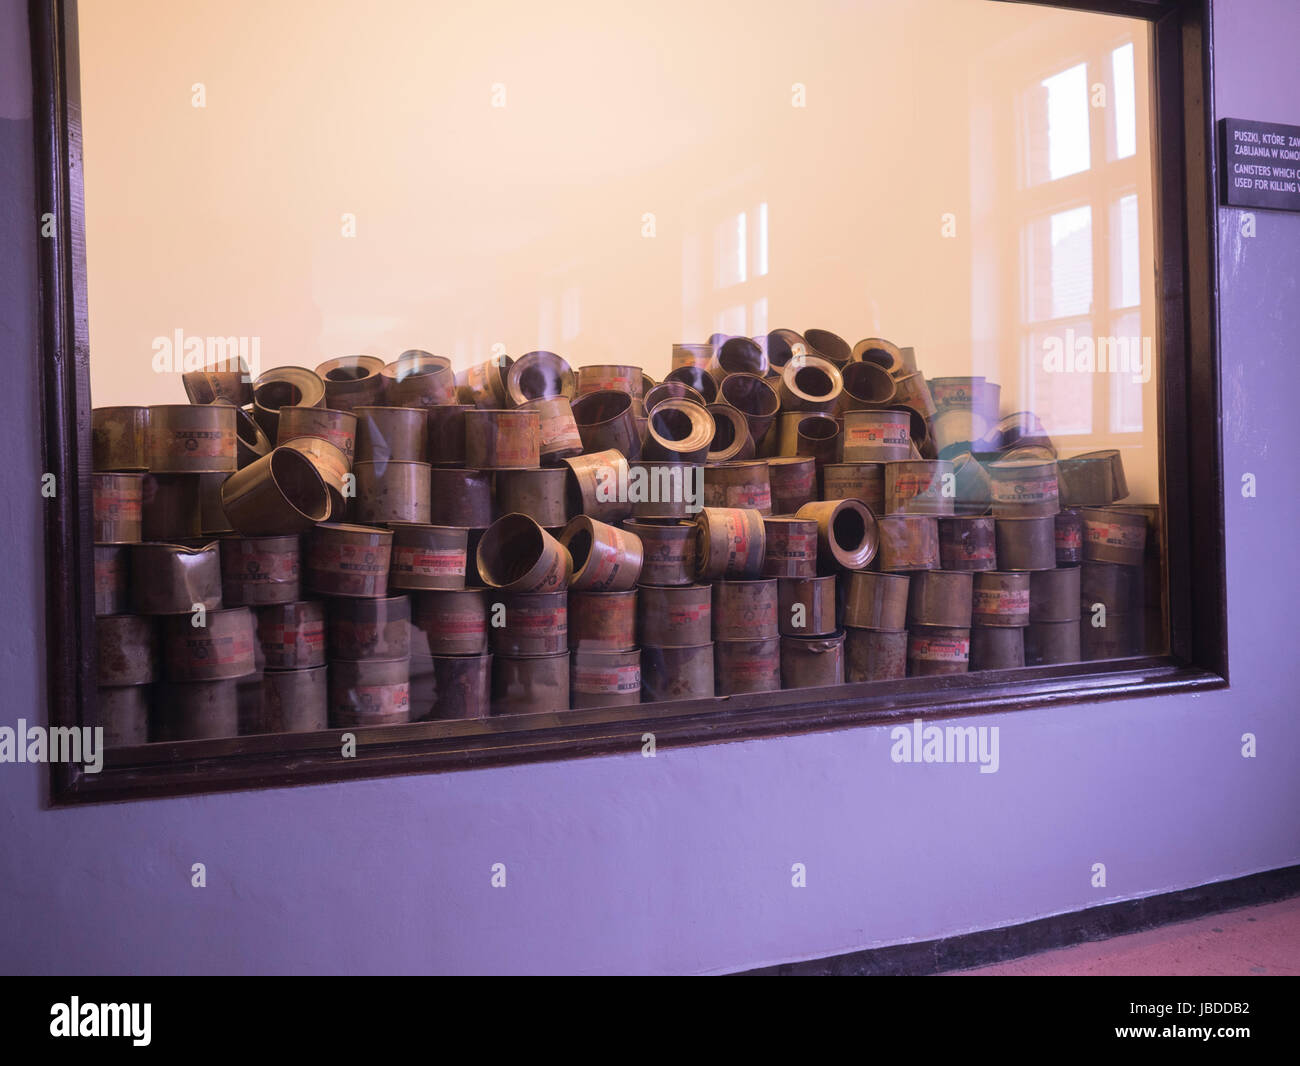 Canisters of Zyklon B used by the Nazis to kill millions of Jews. Stock Photo